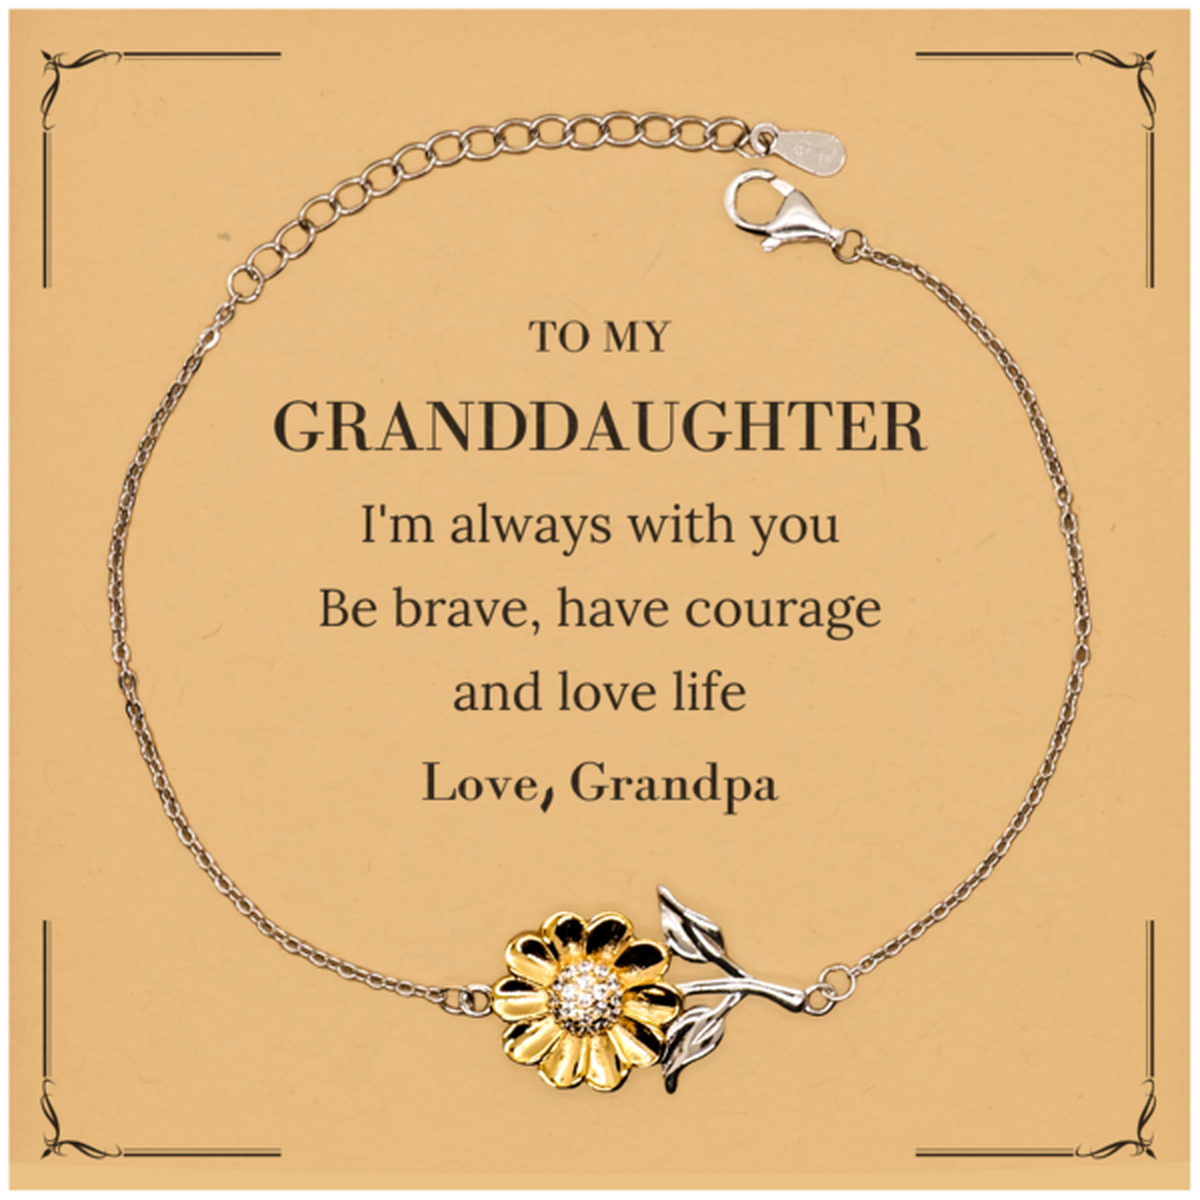 To My Granddaughter Gifts from Grandpa, Unique Sunflower Bracelet Inspirational Christmas Birthday Graduation Gifts for Granddaughter I'm always with you. Be brave, have courage and love life. Love, Grandpa